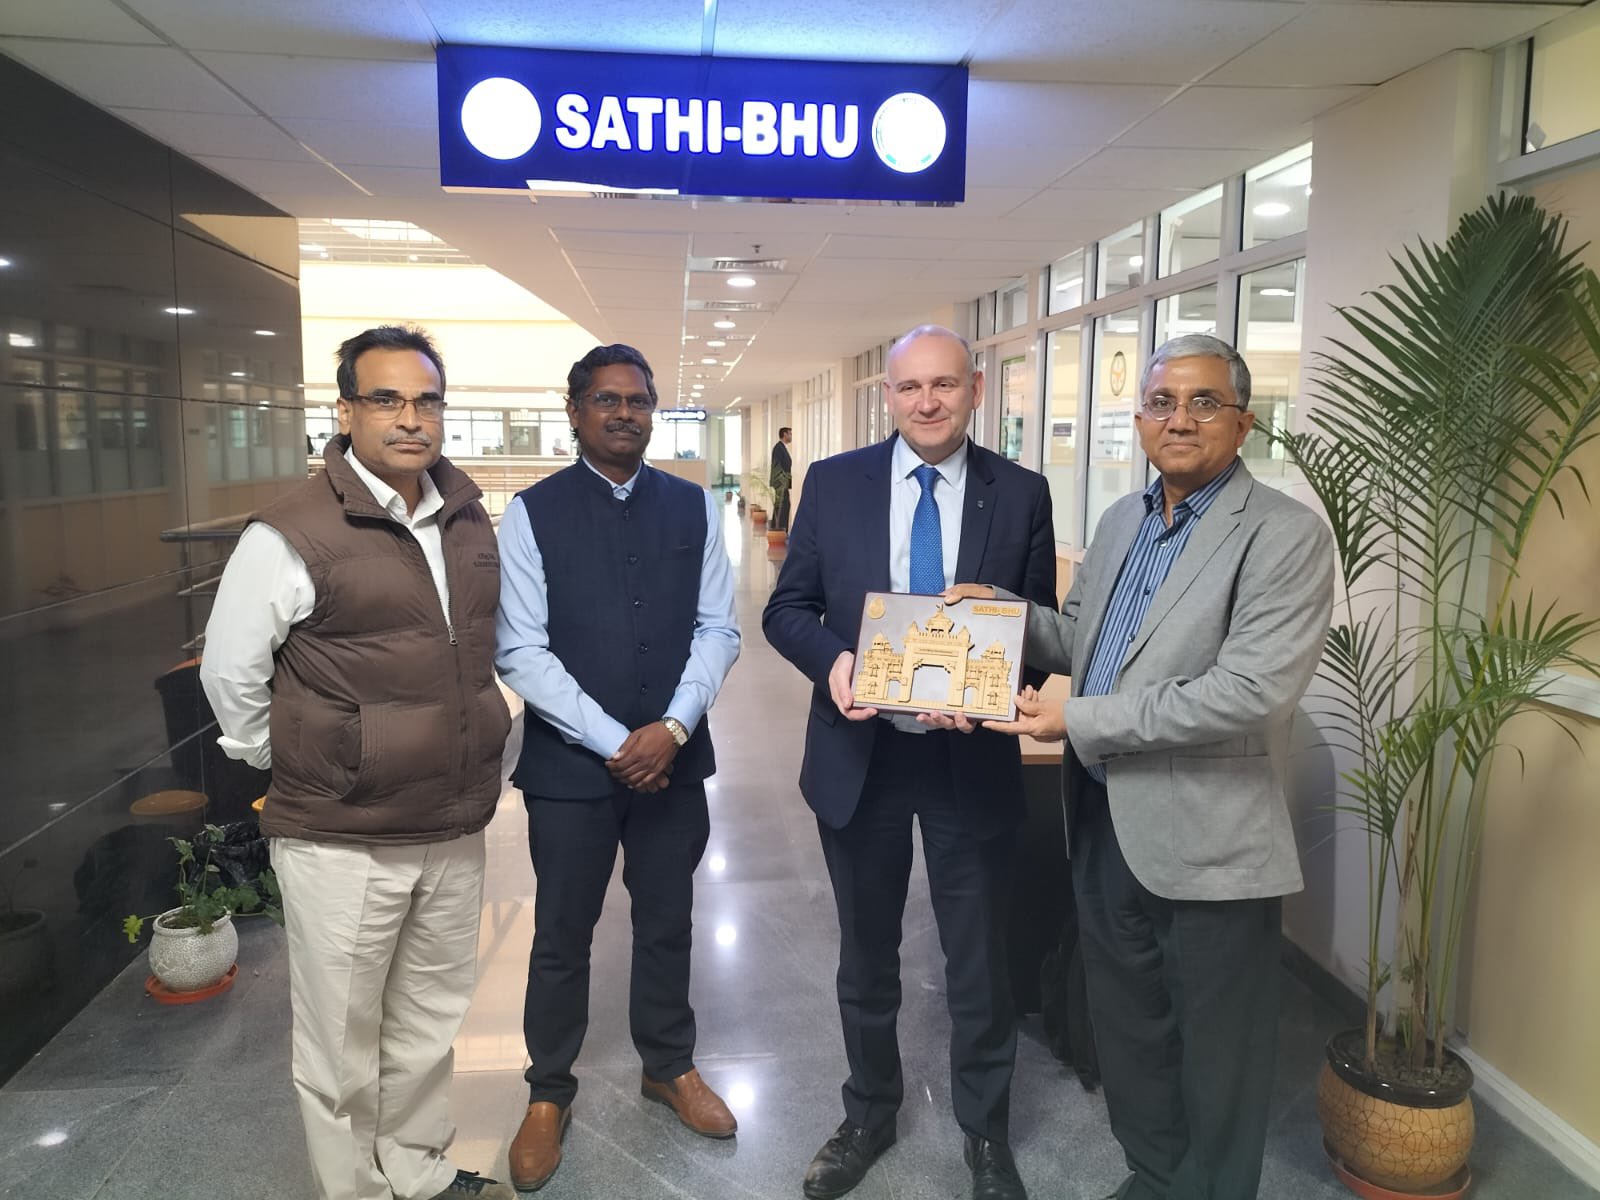 Prof. Jeremy Simpson, Dean, Science, University College Dublin, Ireland visited SATHI-BHU facility at Central Discovery Centre, BHU